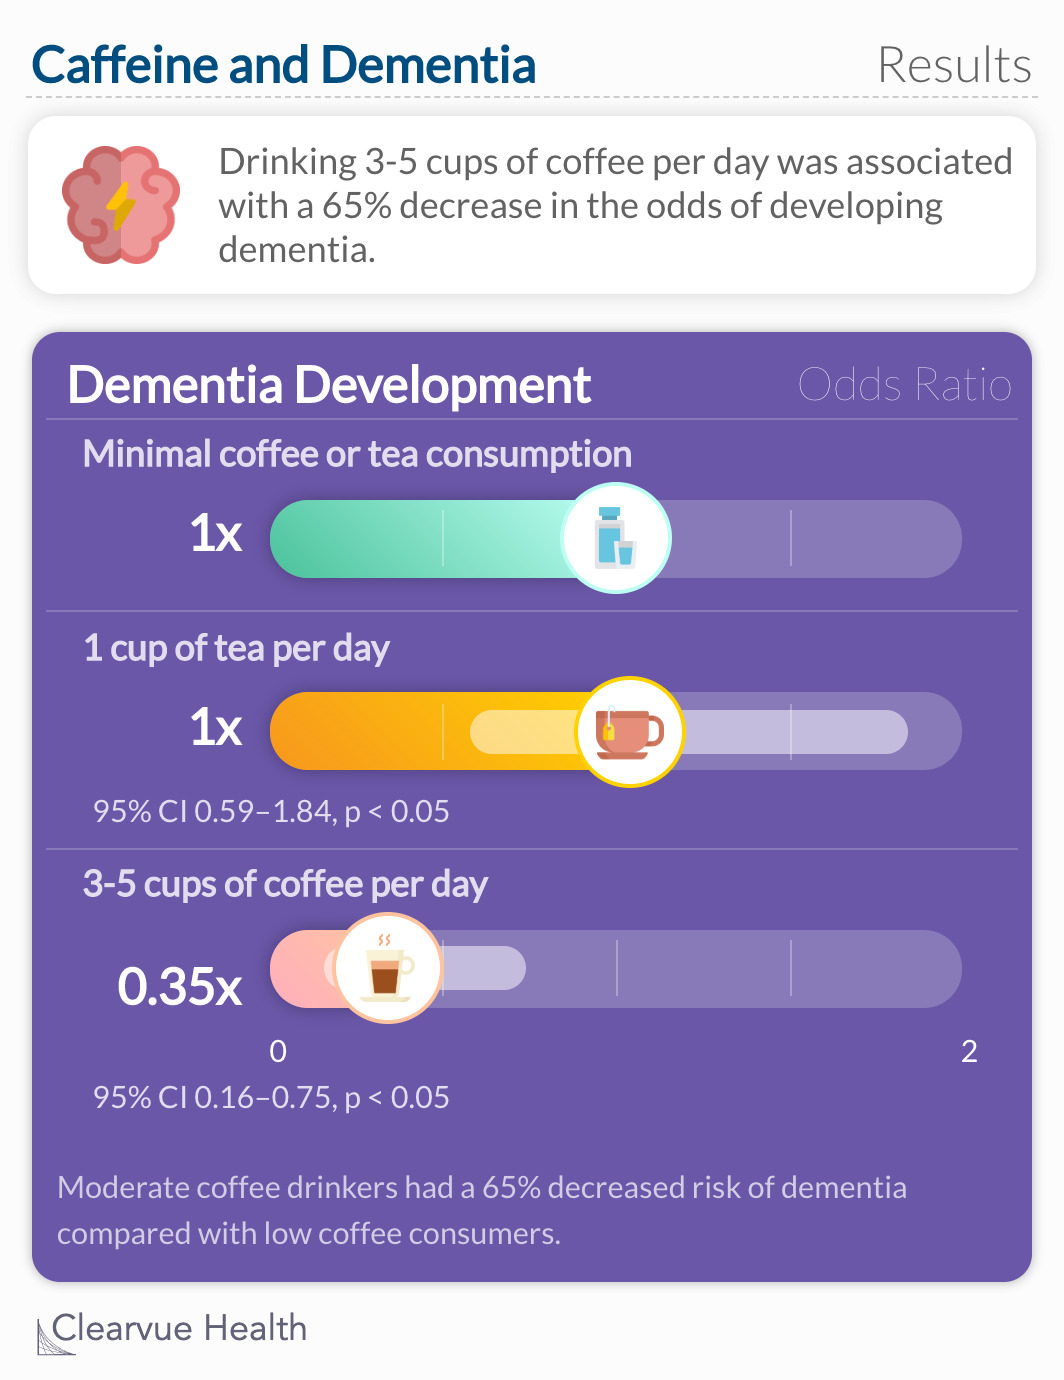 Drinking 3-5 cups of coffee per day was associated with a 65% decrease in the odds of developing dementia. 